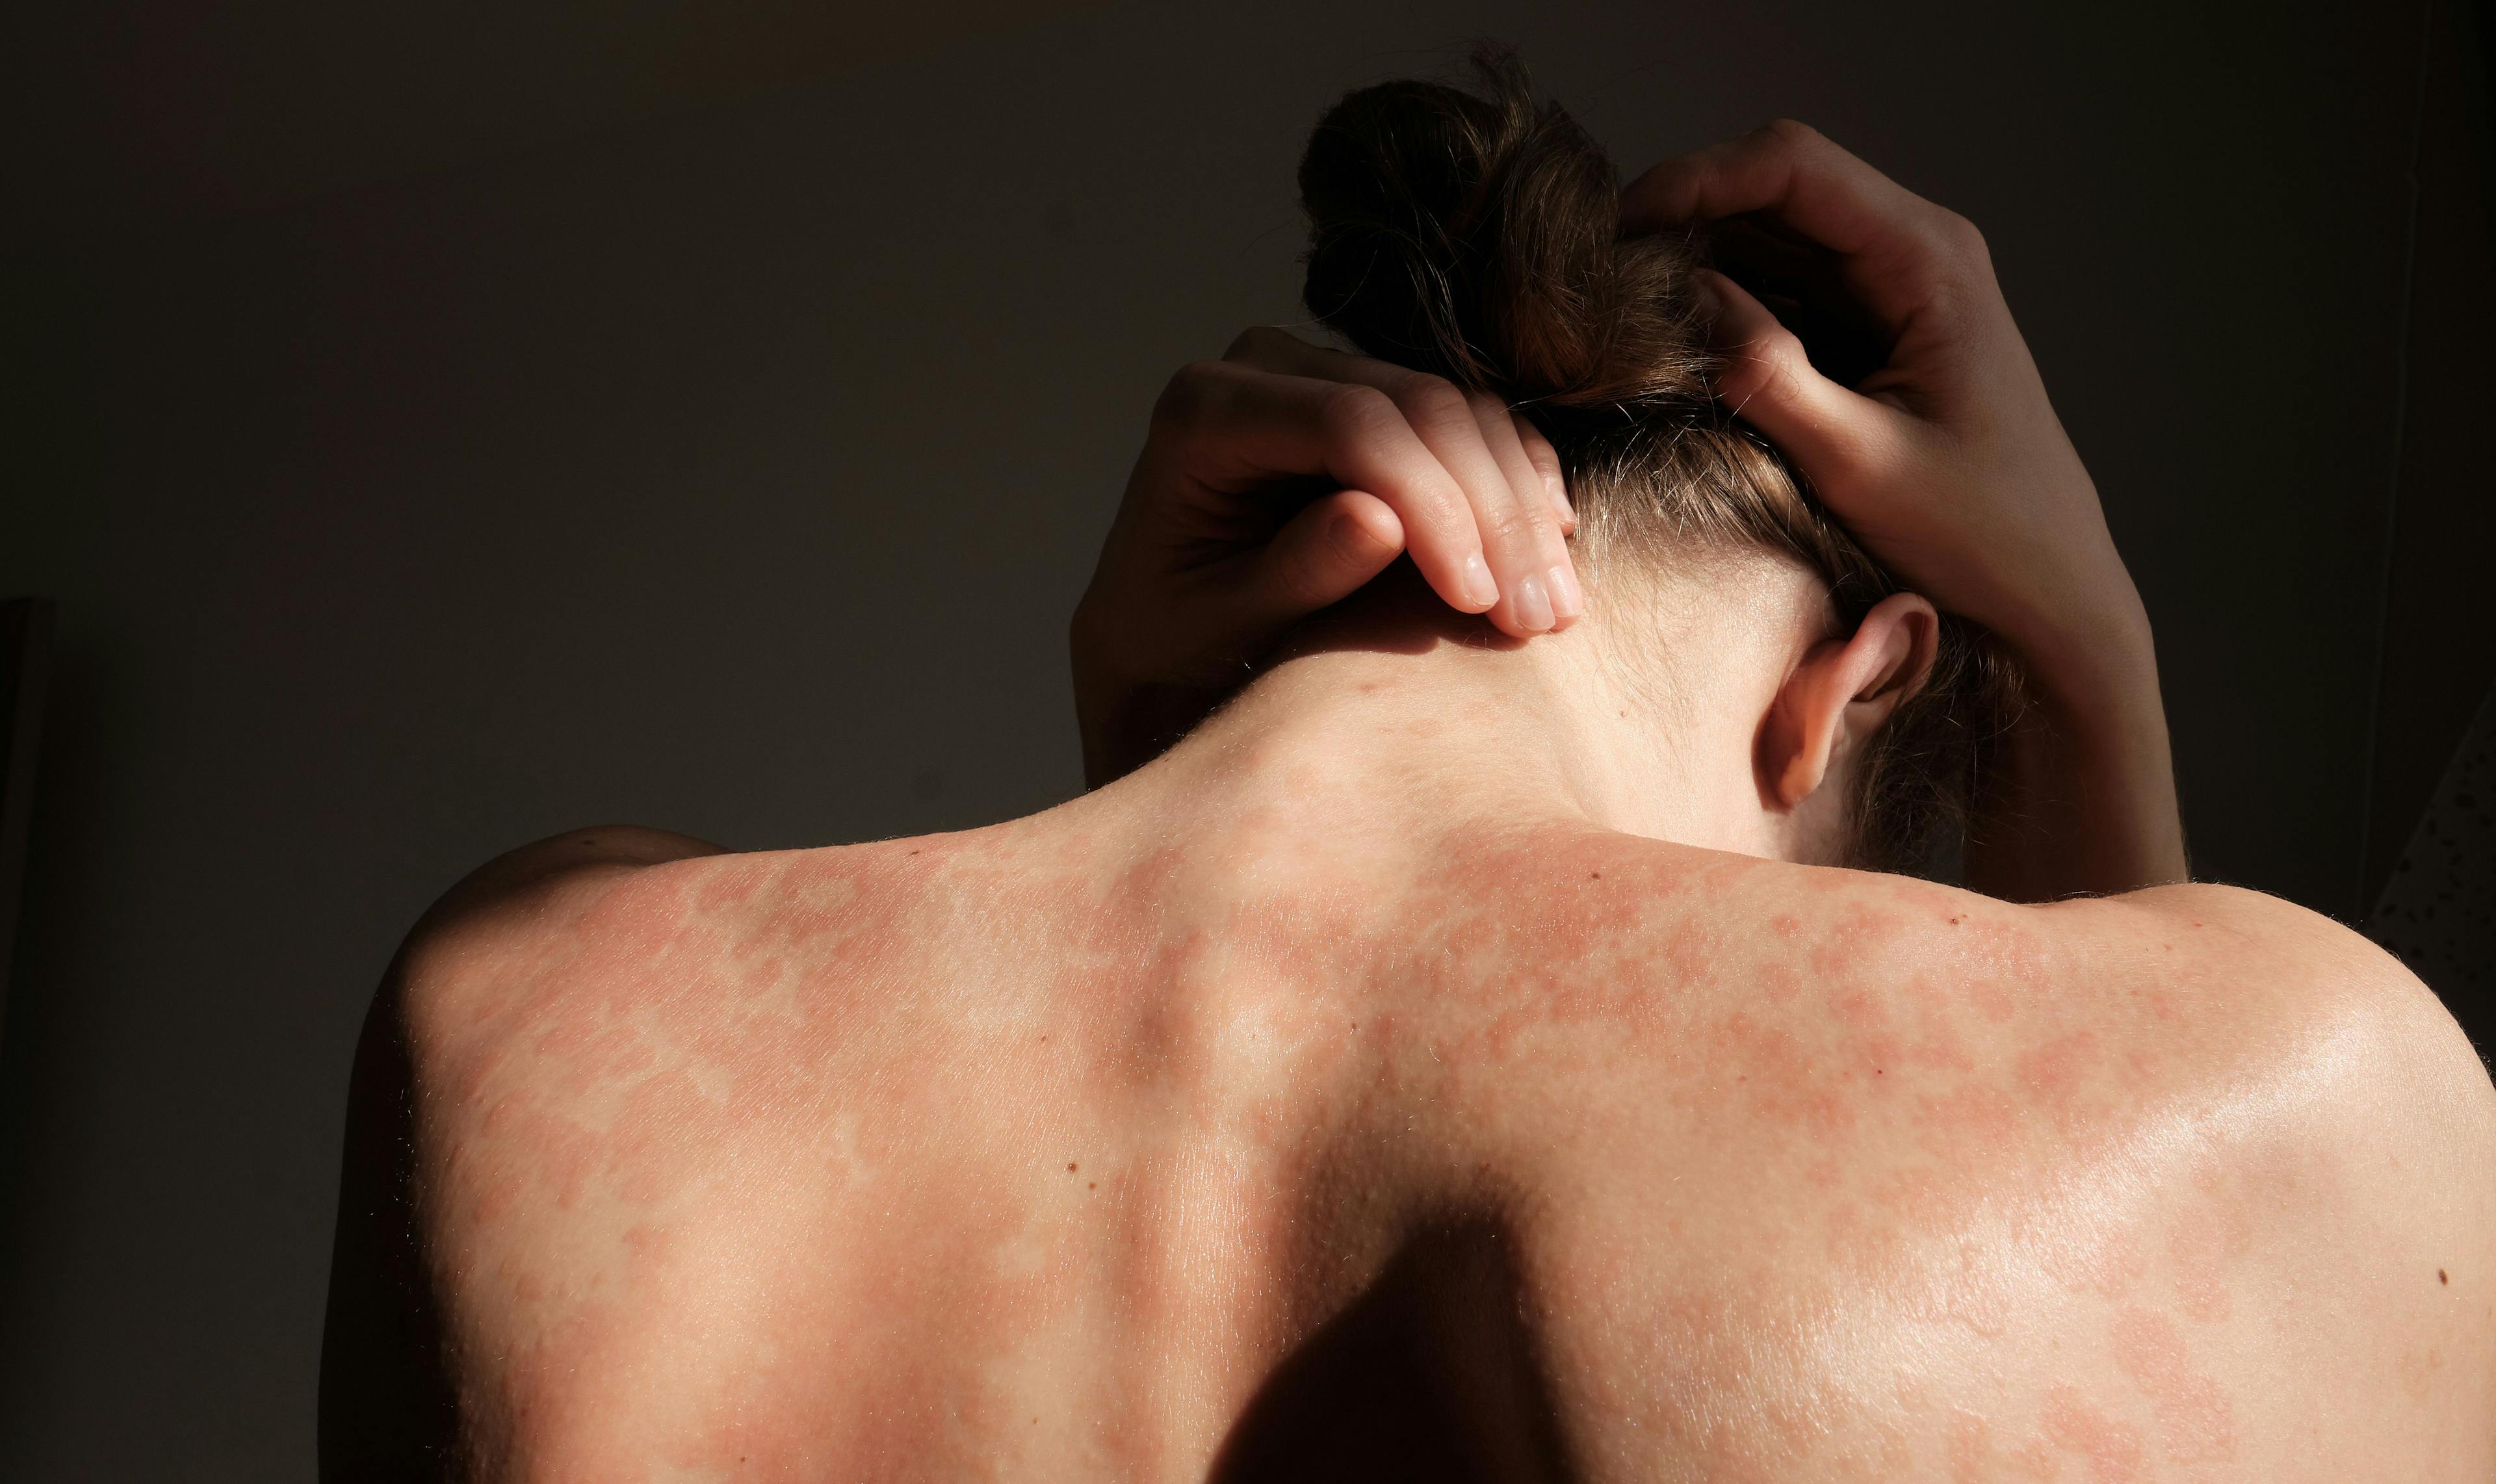 Patient with psoriasis | Image Credit: © stockmaster - stock.adobe.com